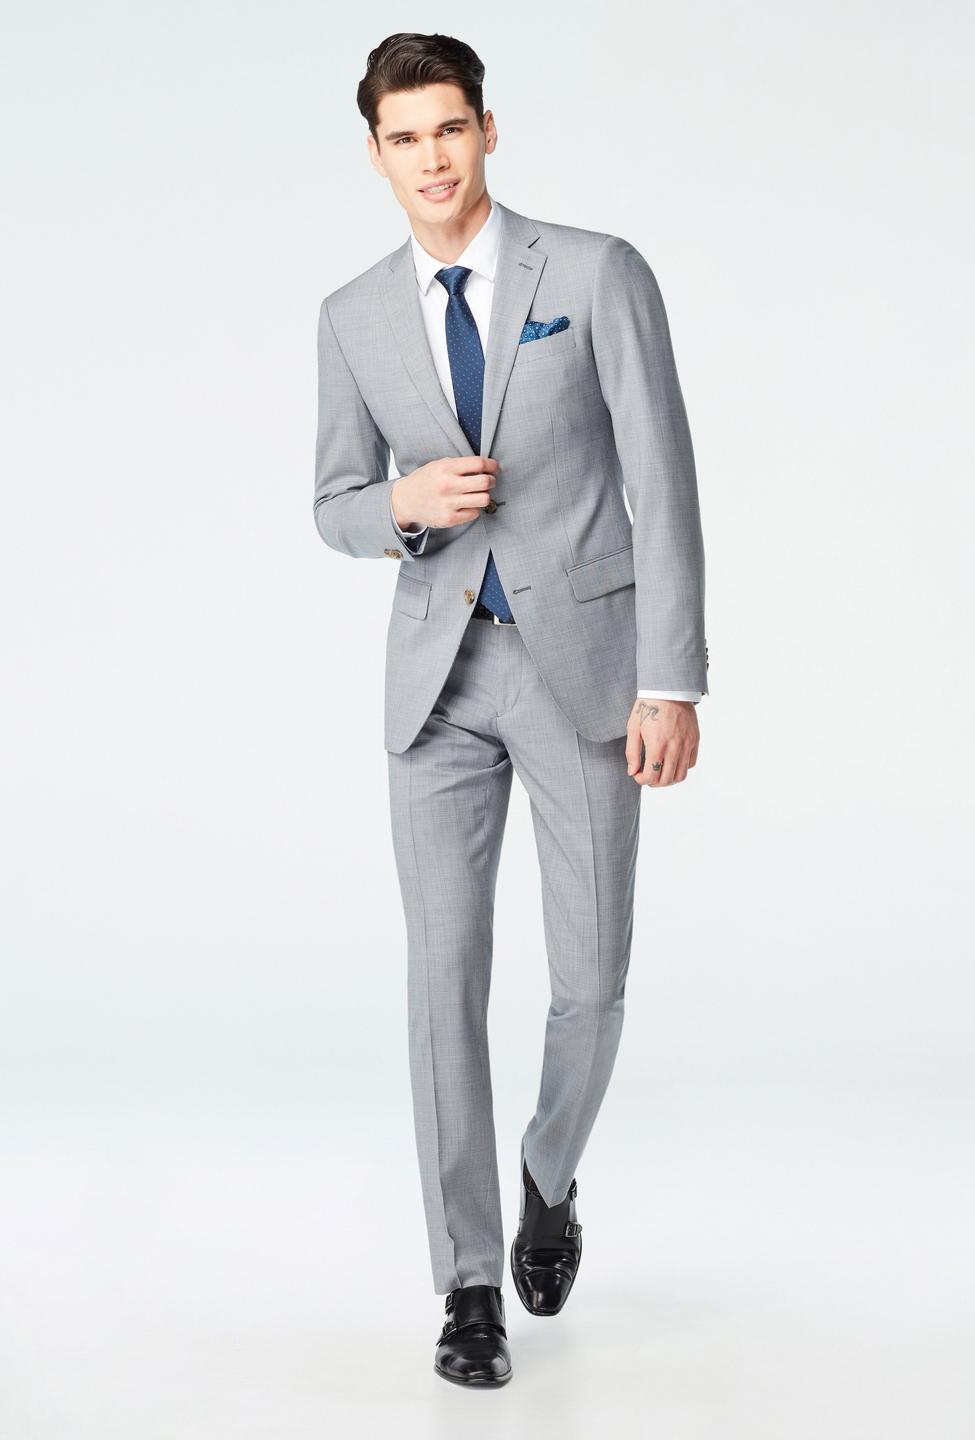 Blue suit - Coalville Houndstooth Design from Seasonal Indochino Collection